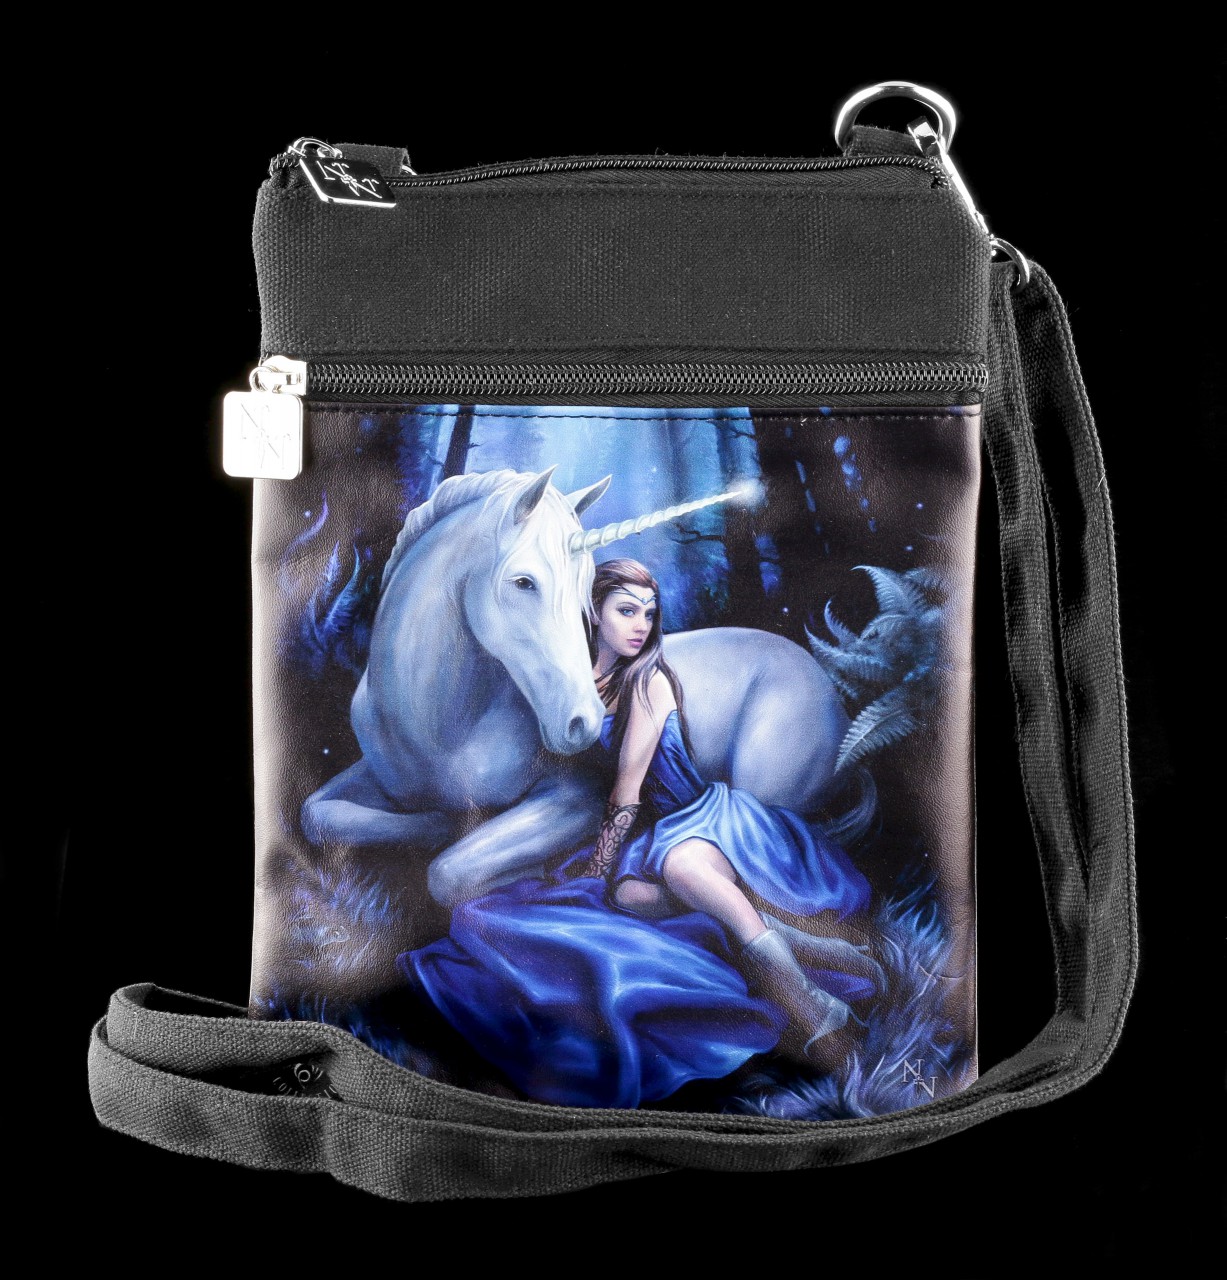 Small Shoulder Bag with Unicorn - Blue Moon